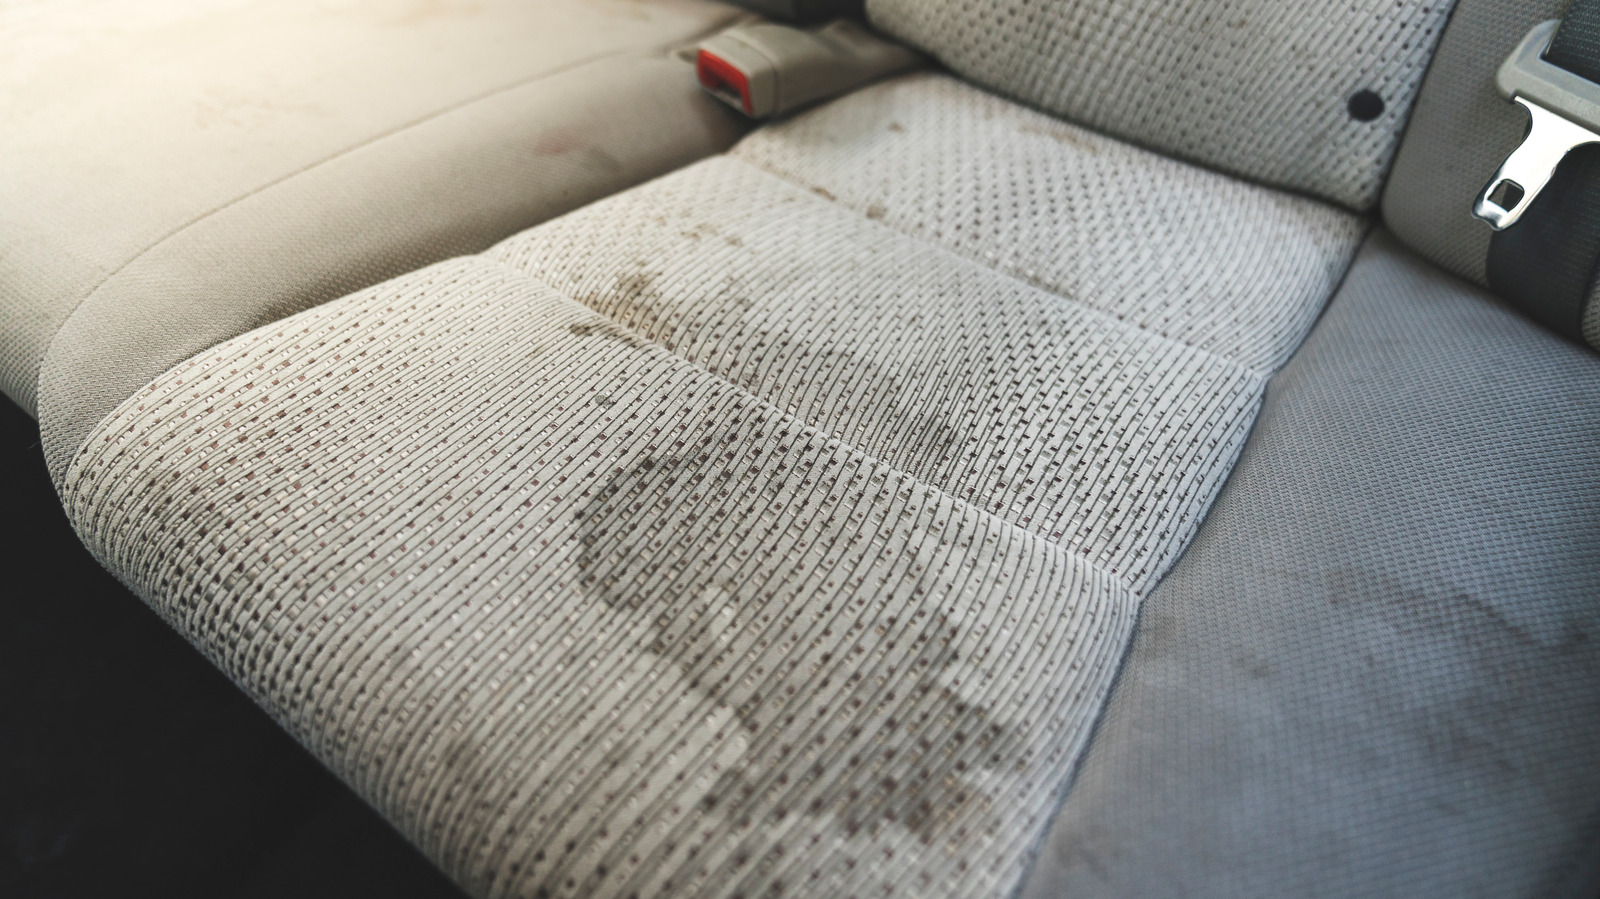 How To Clean Stains From Your Cars Seats With Baking Soda